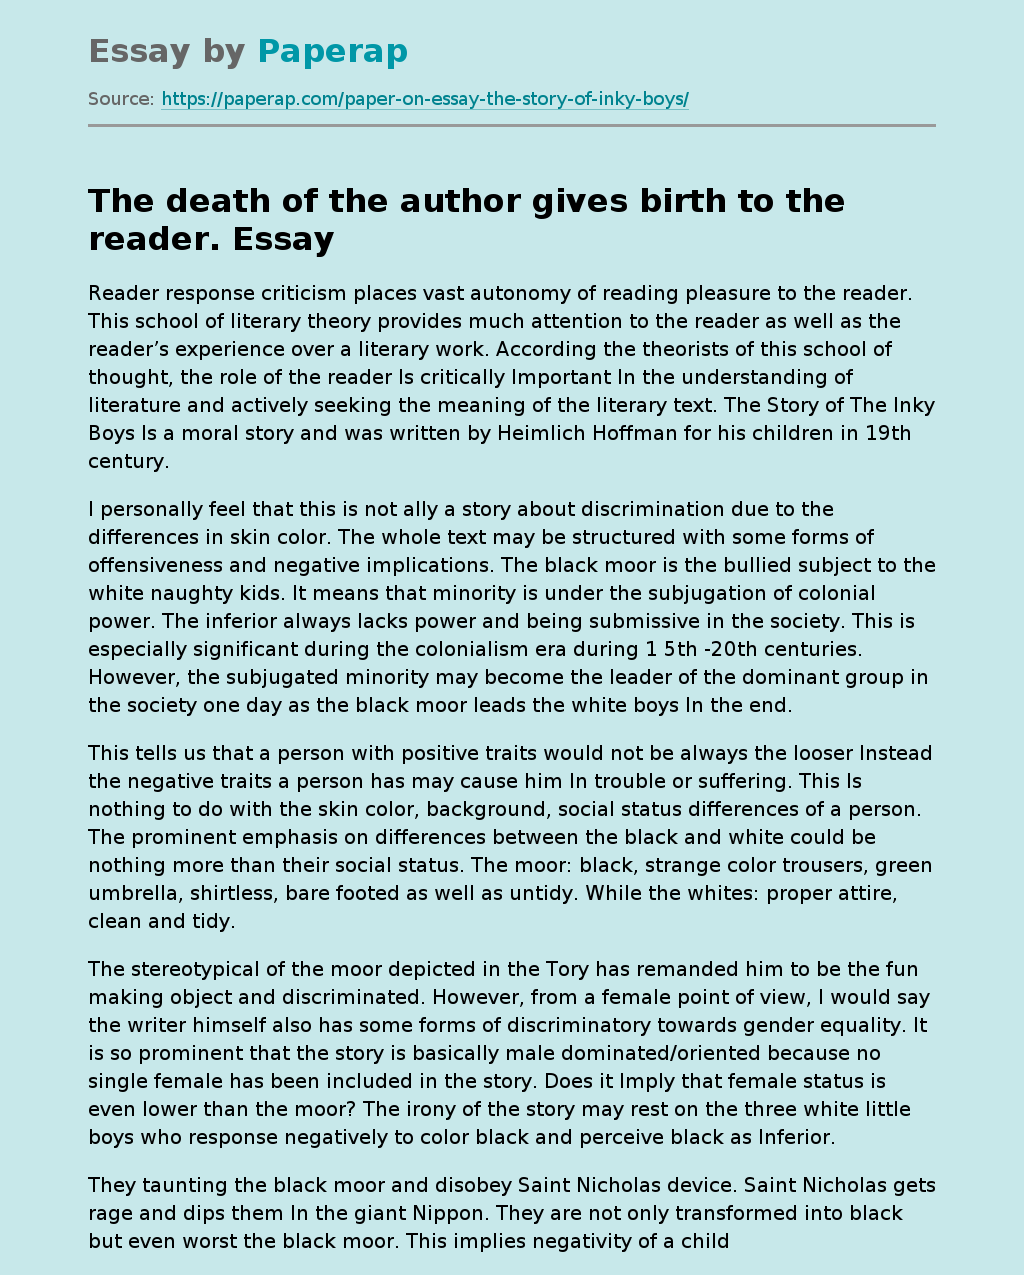 The death of the author gives birth to the reader.